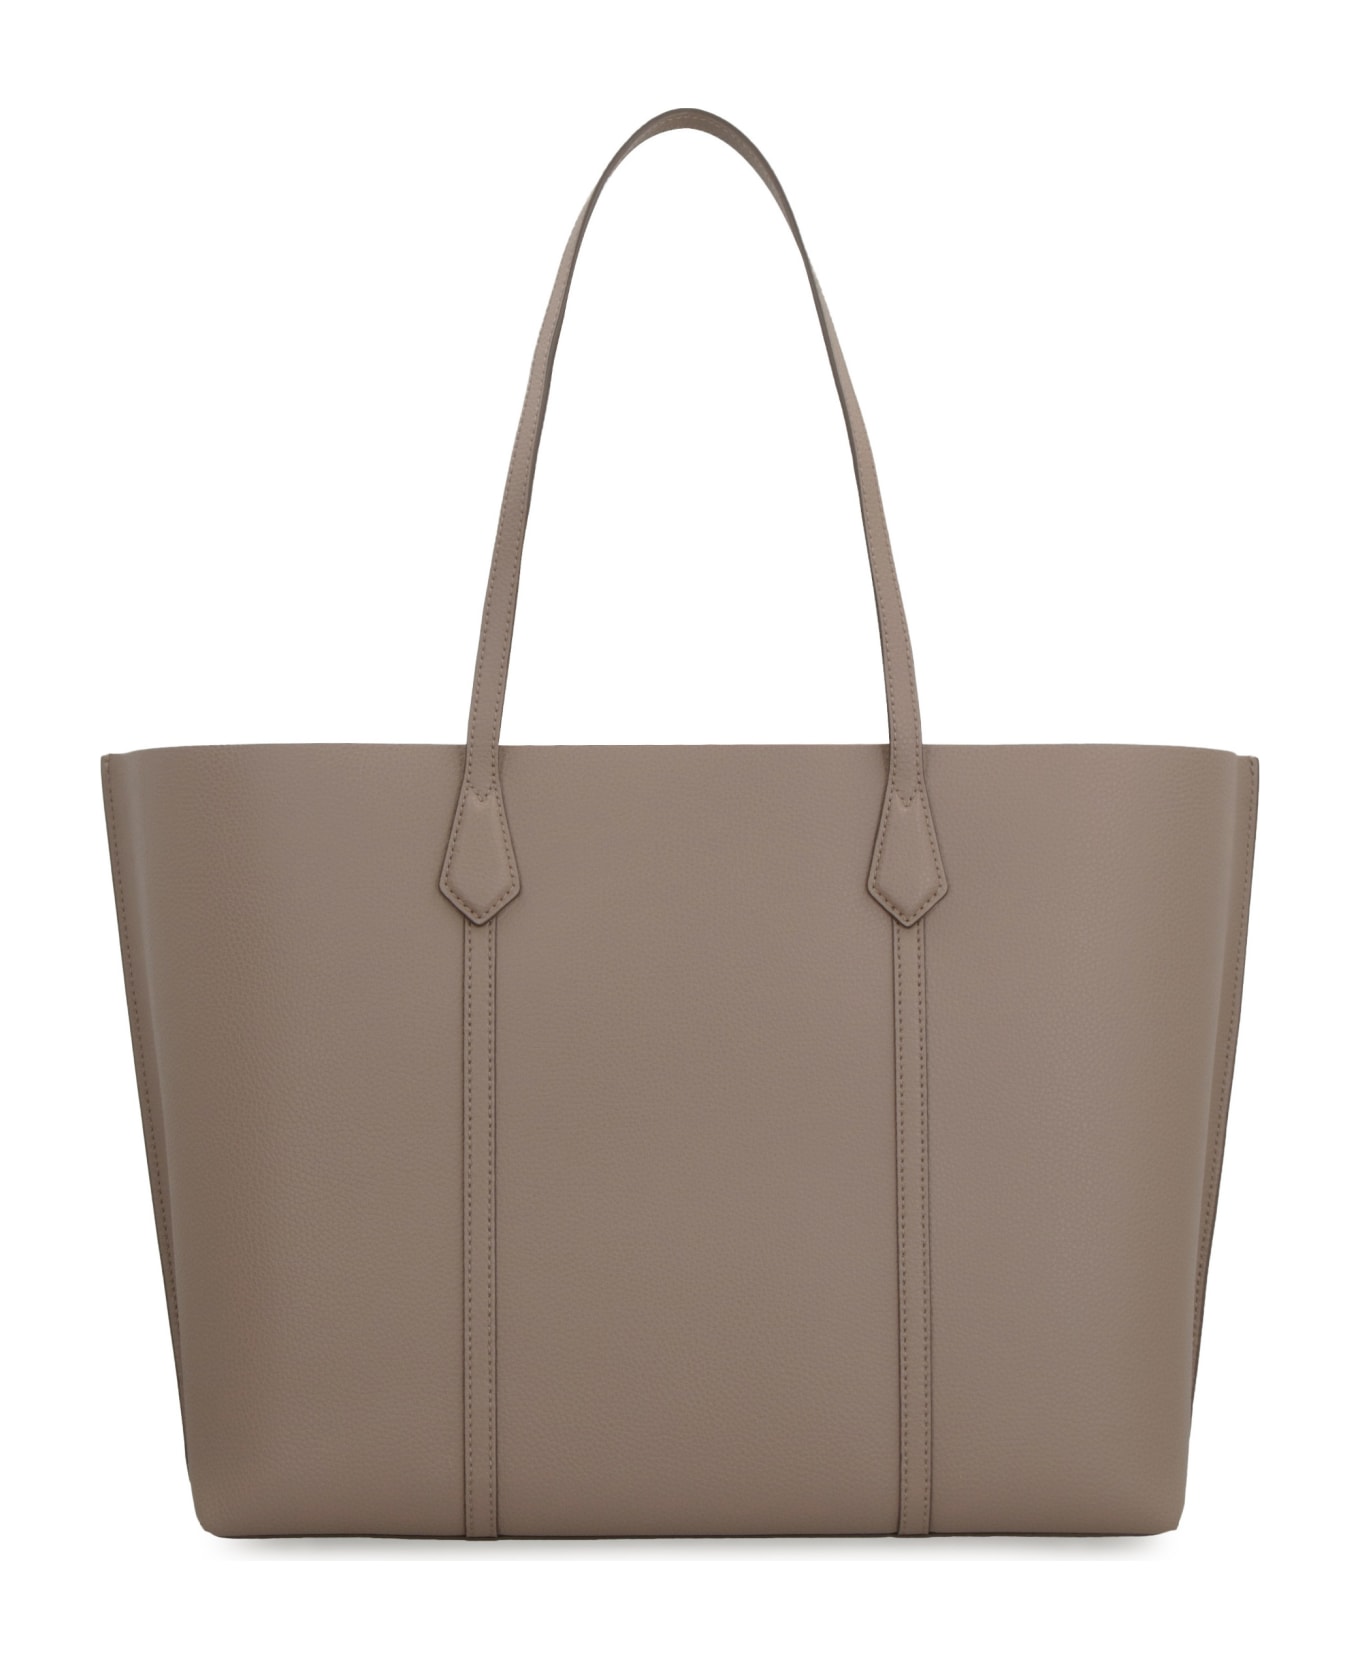 Tory Burch Perry Smooth Leather Tote Bag - turtledove